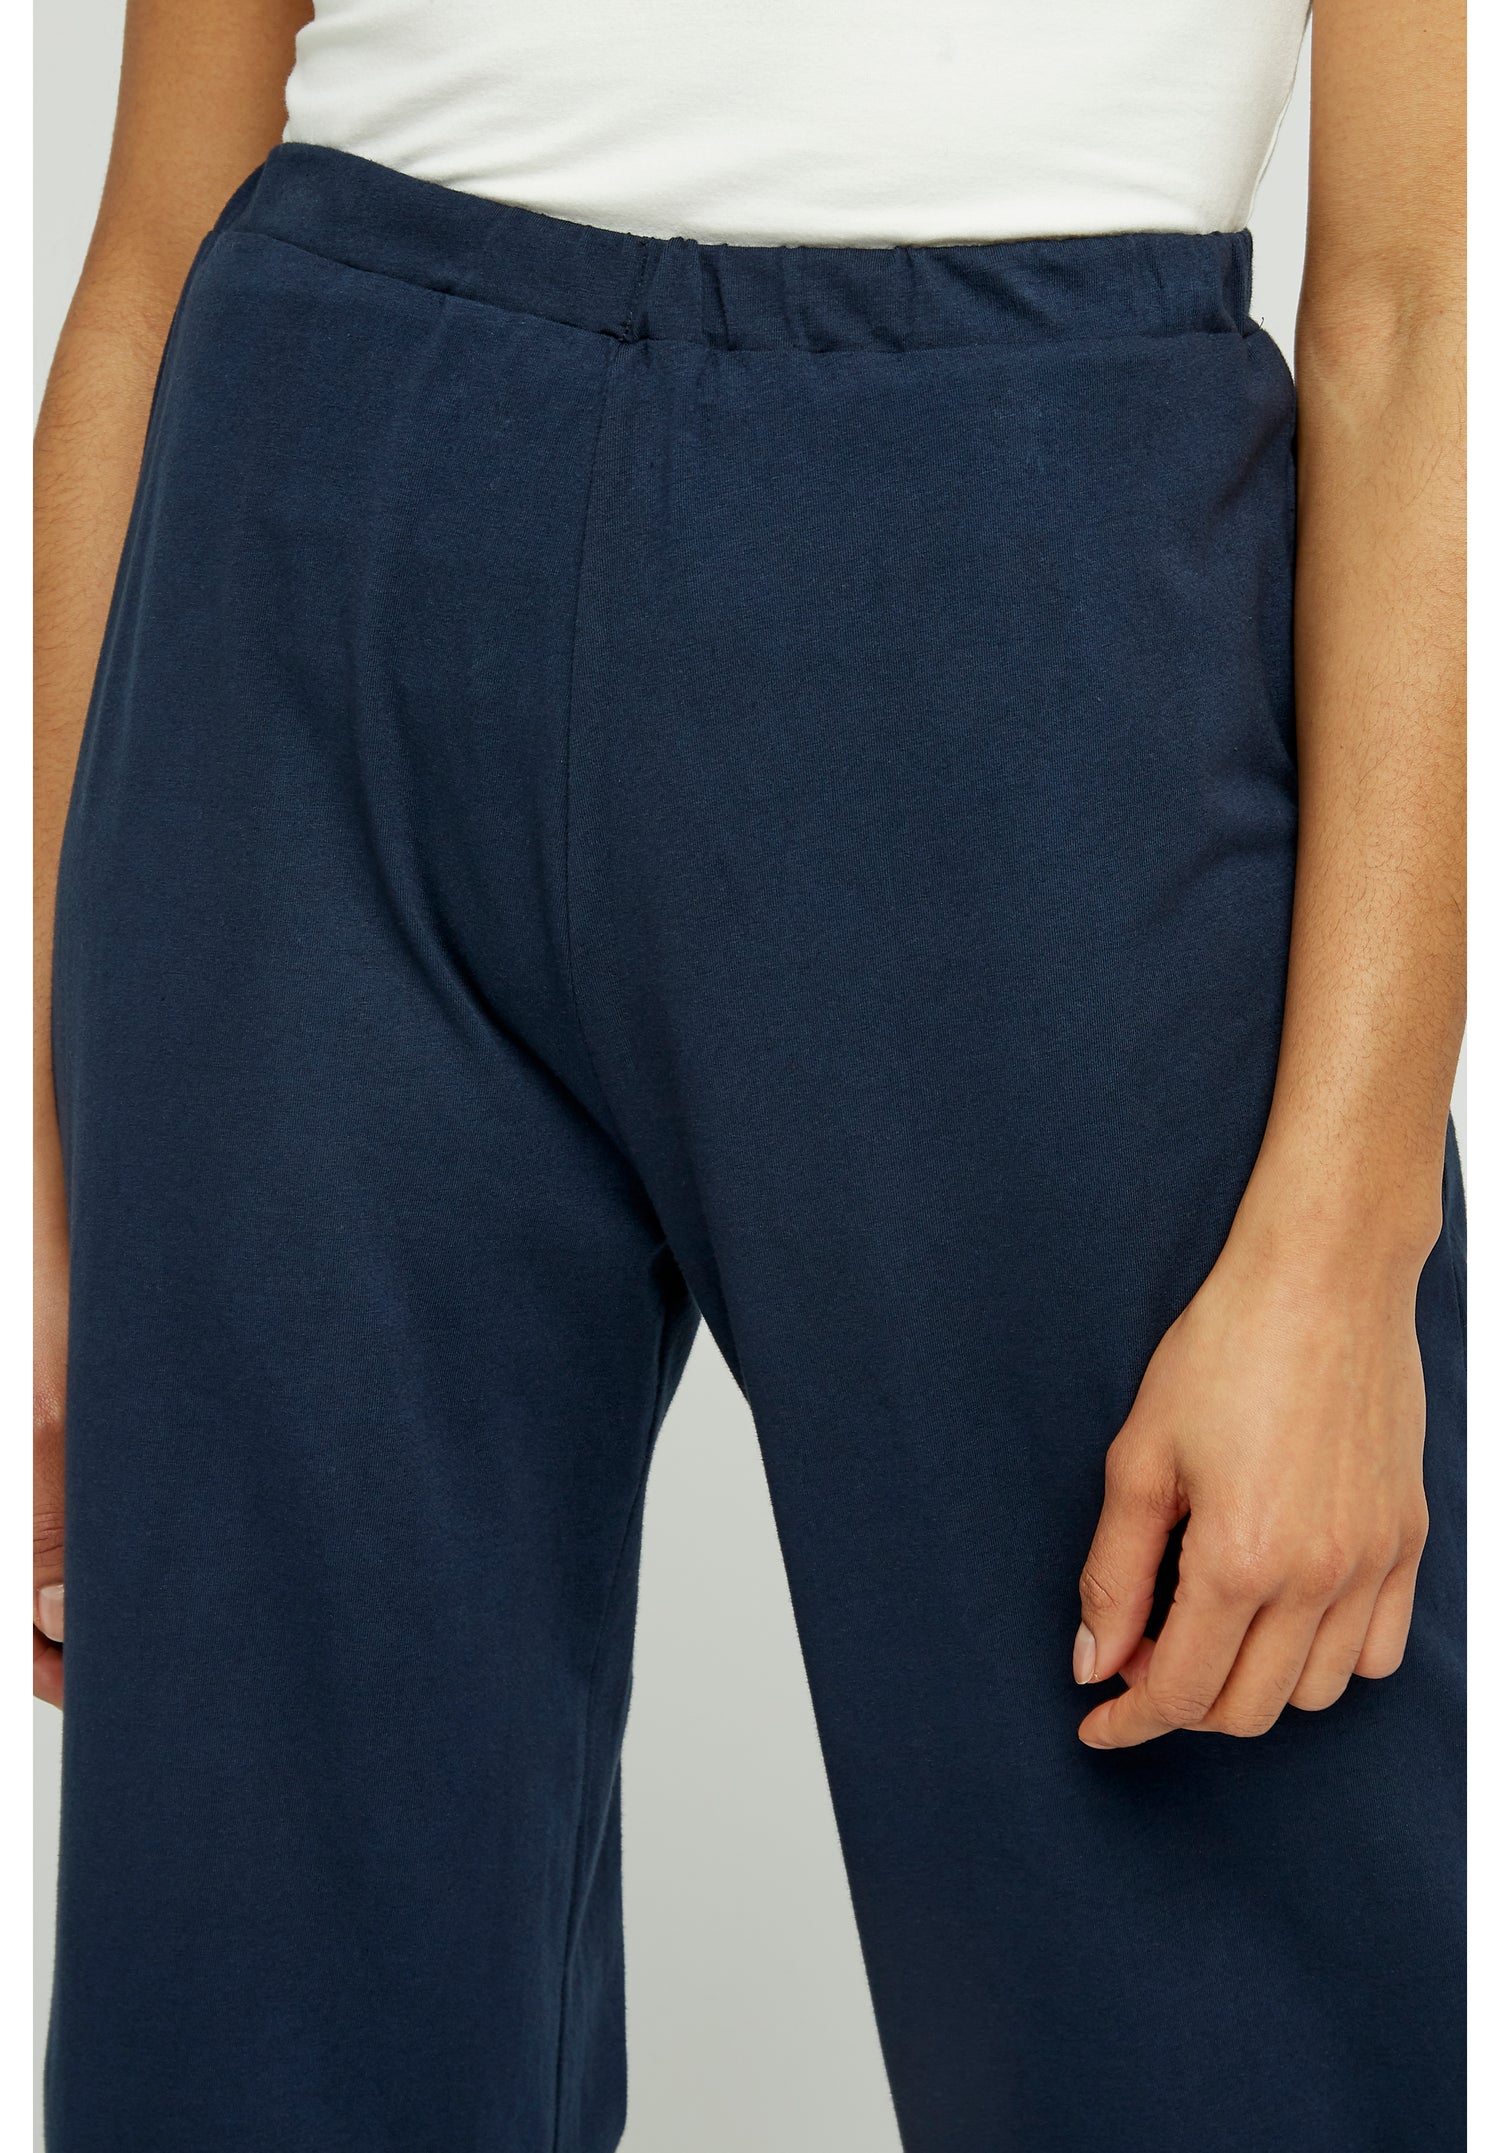 Chandre Trousers - Navy